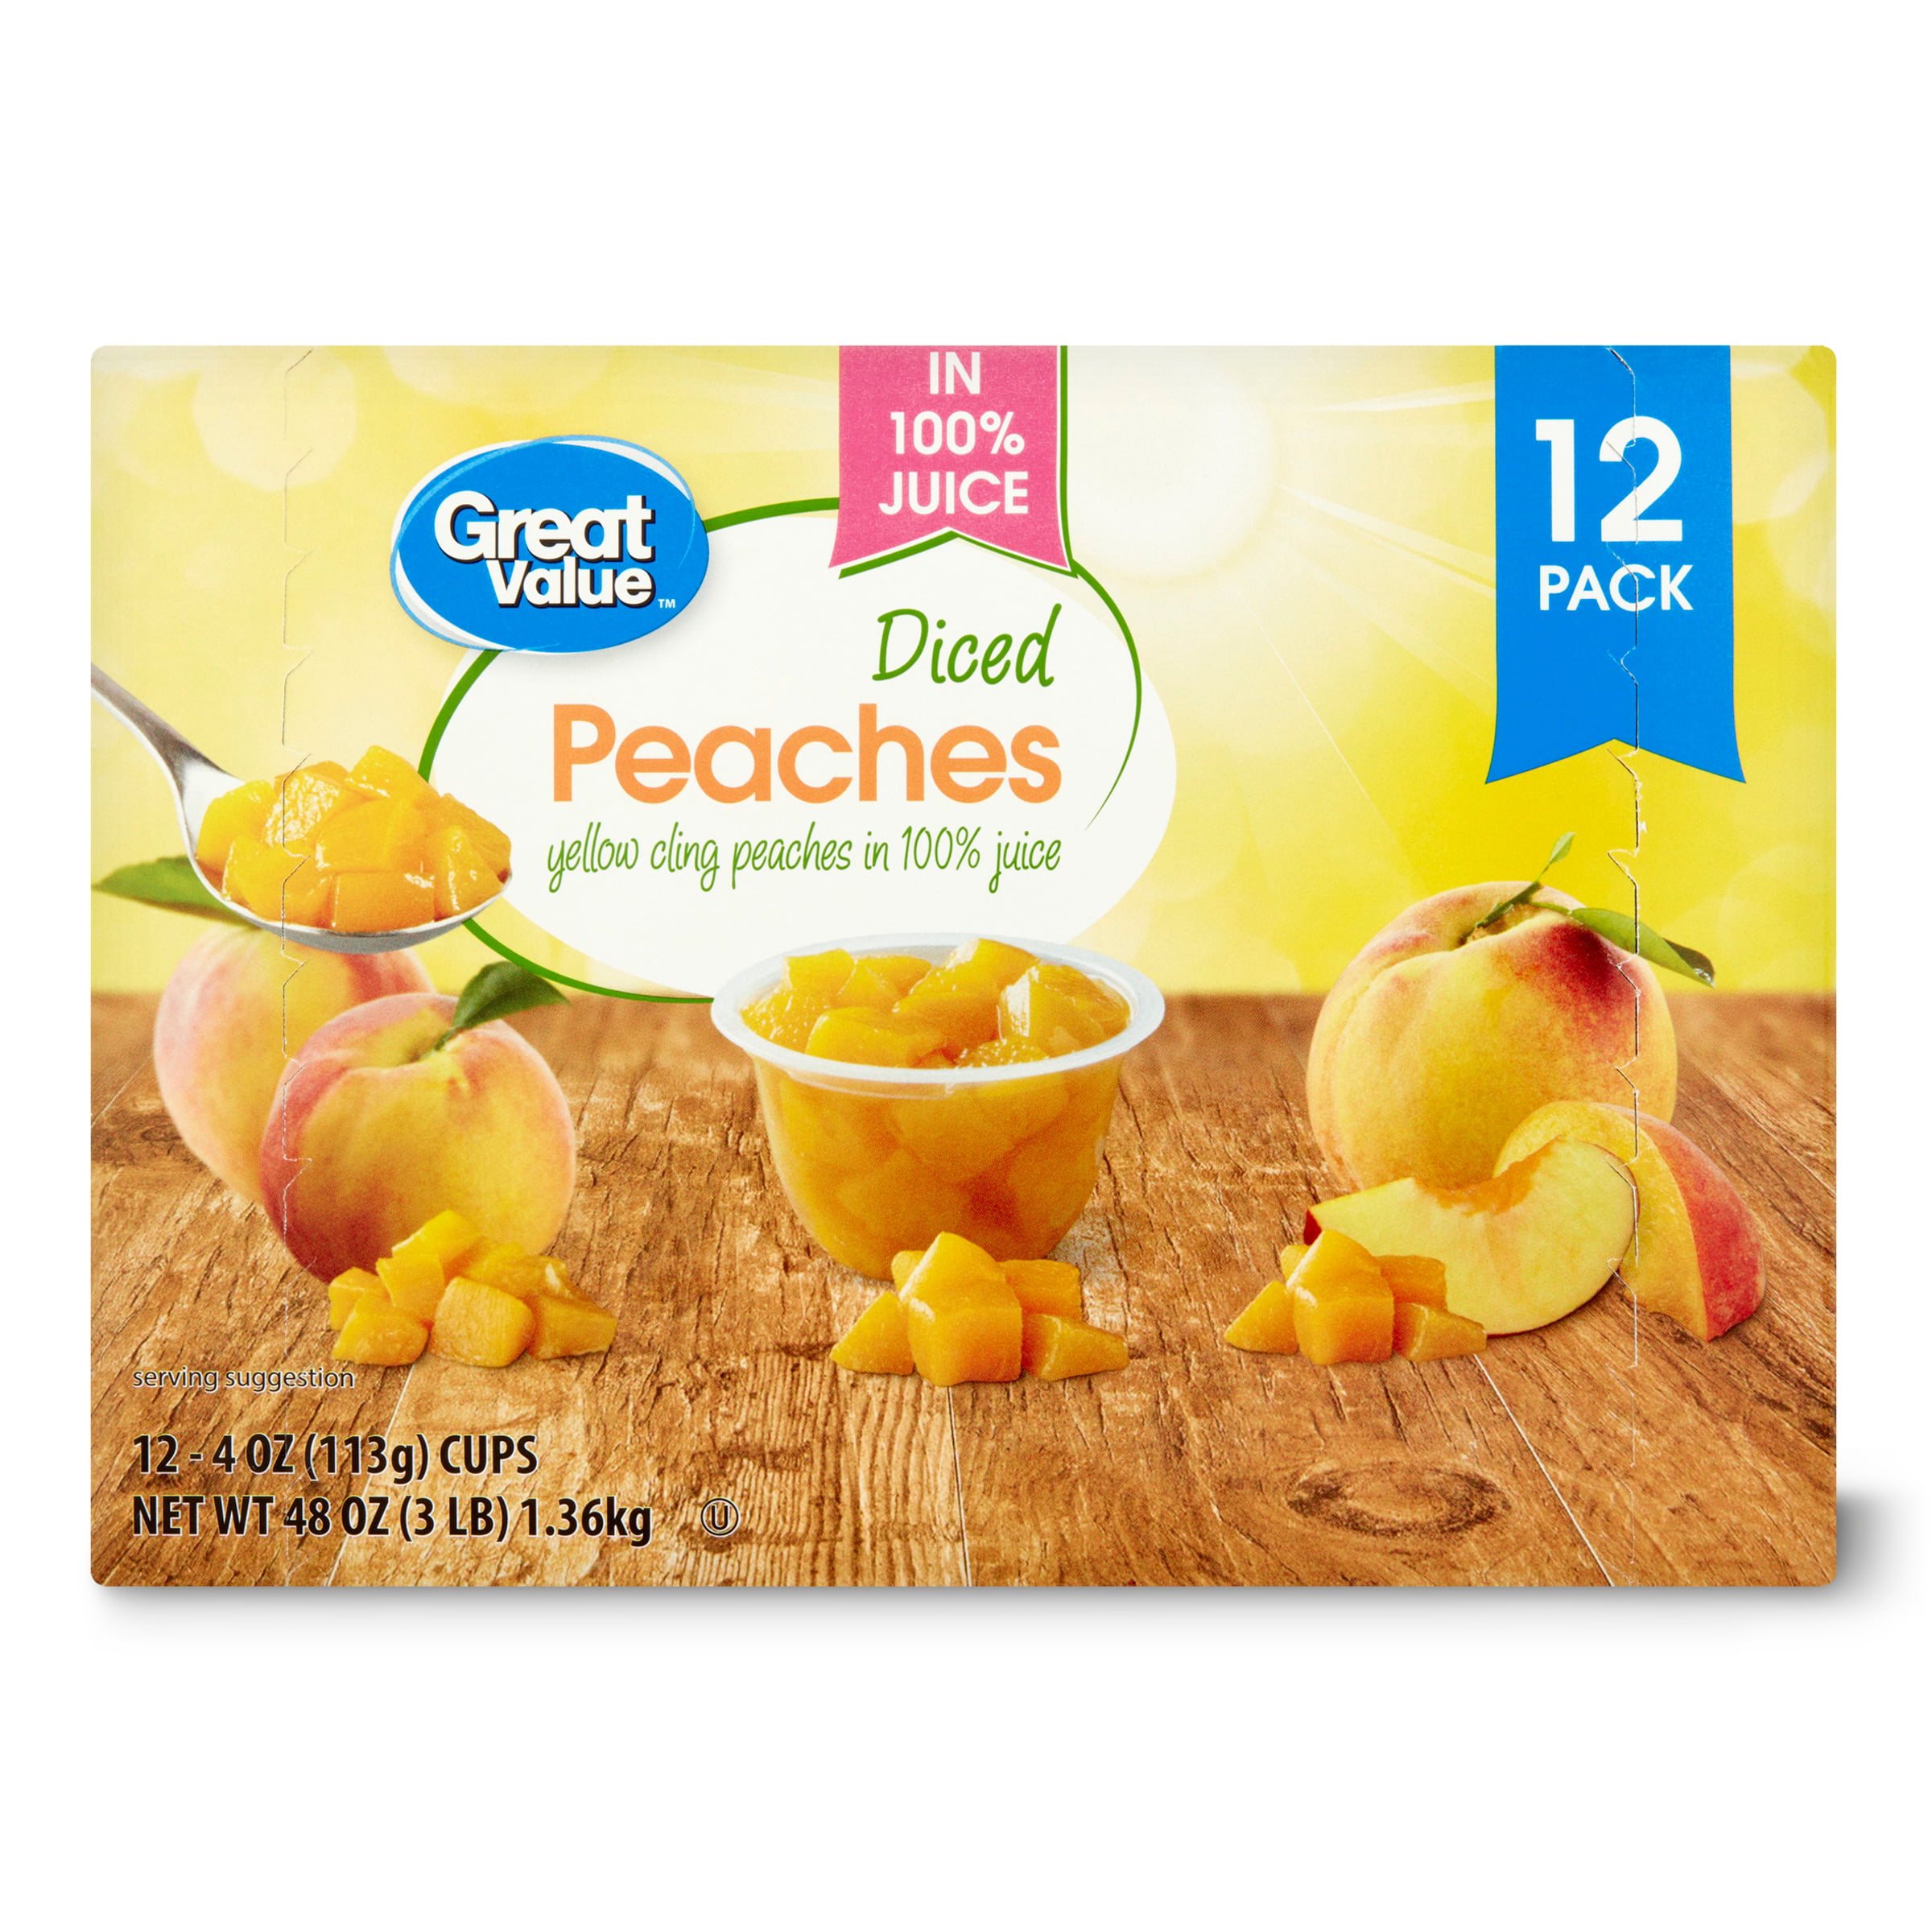 Great Value Diced Peaches 12 pack $5 @ Walmart